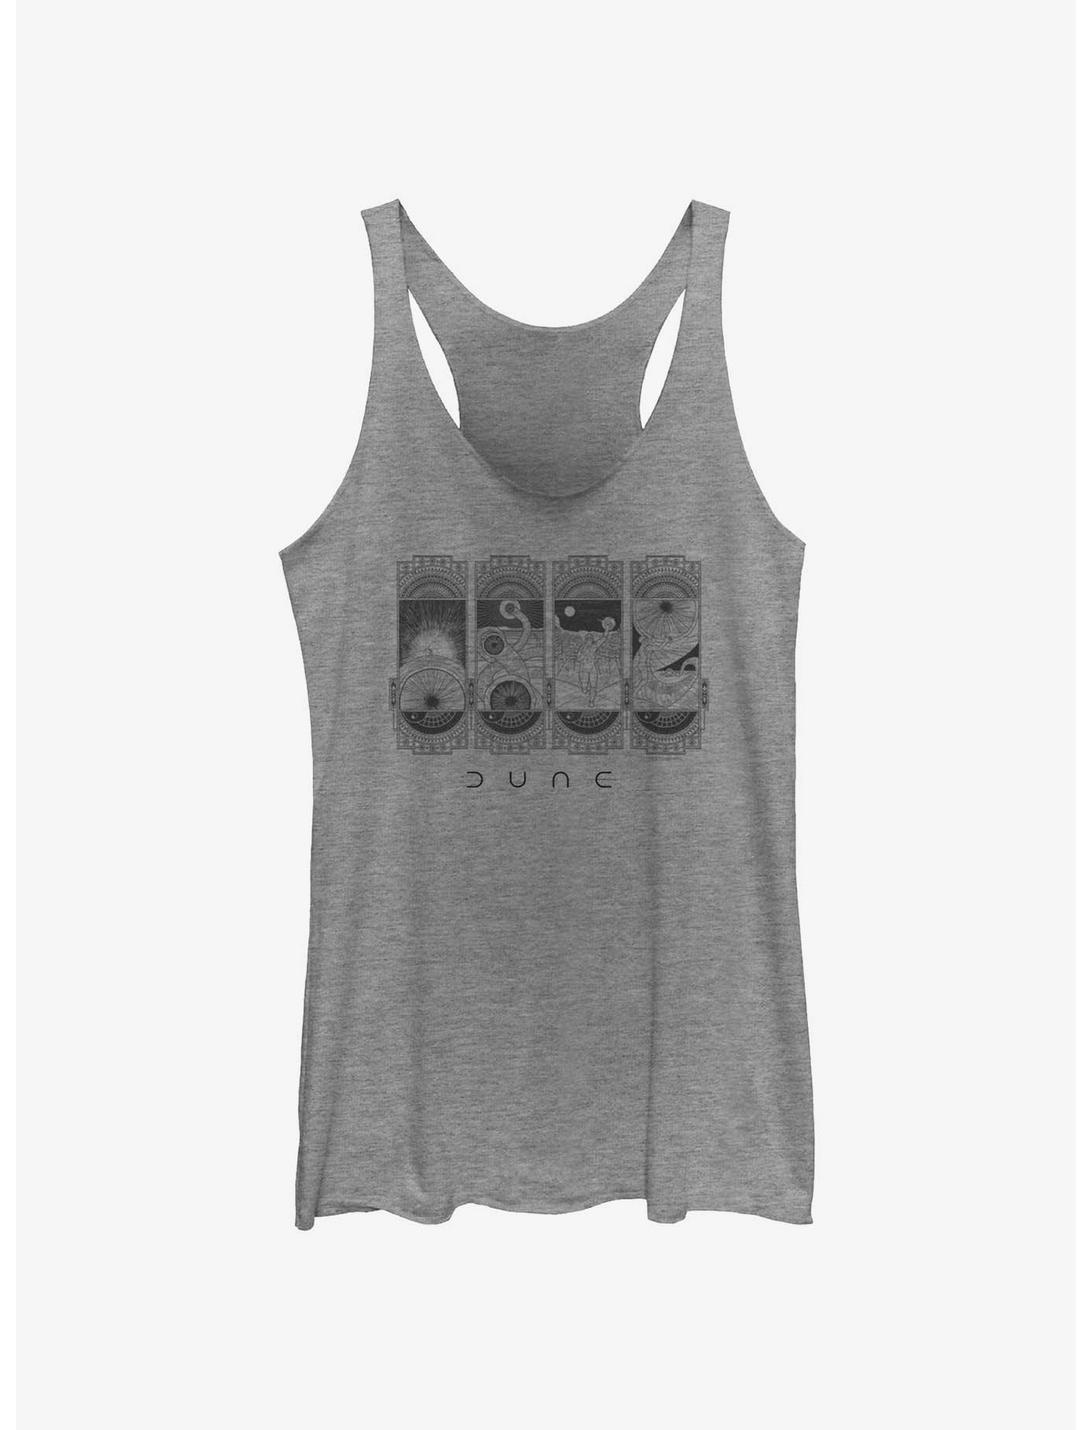 Dune: Part Two Pictograms Womens Tank Top, GRAY HTR, hi-res